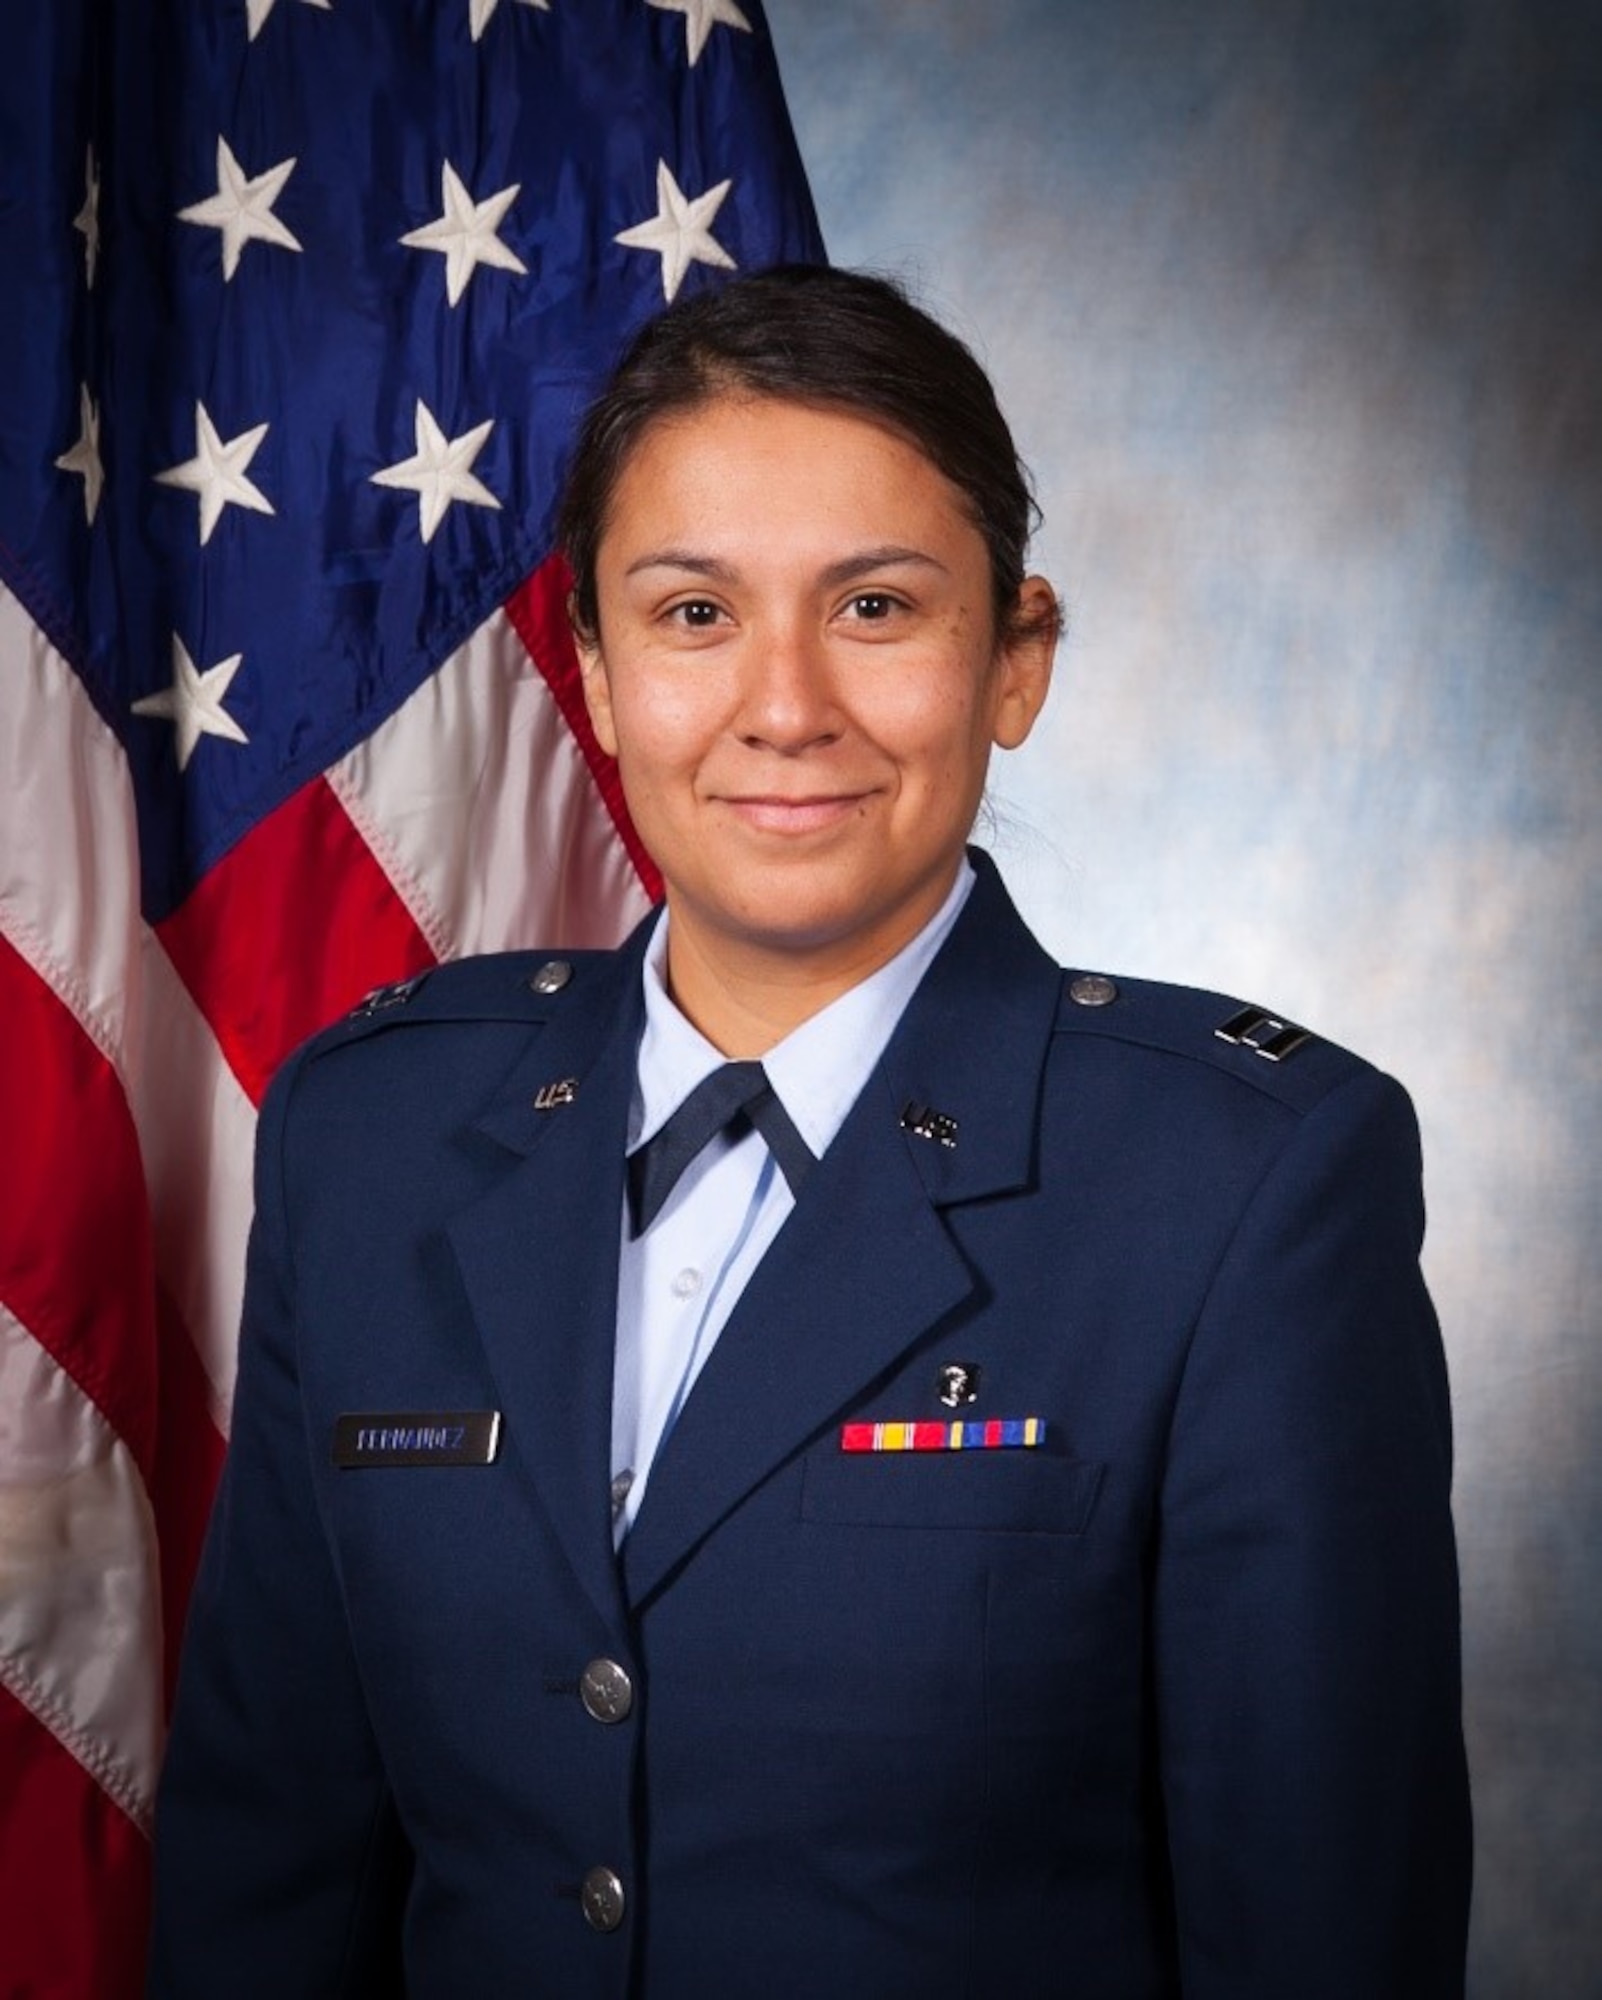 Capt. Lisa Fernandez, Air Force Research Laboratory medical entomologist, is selected to receive the 2019 STEM Military and Civilian Hero Award at the 31st Annual Great Minds in STEM Conference in September 2019, at Disney’s Coronado Springs Resort in Lake Buena Vista, Florida.